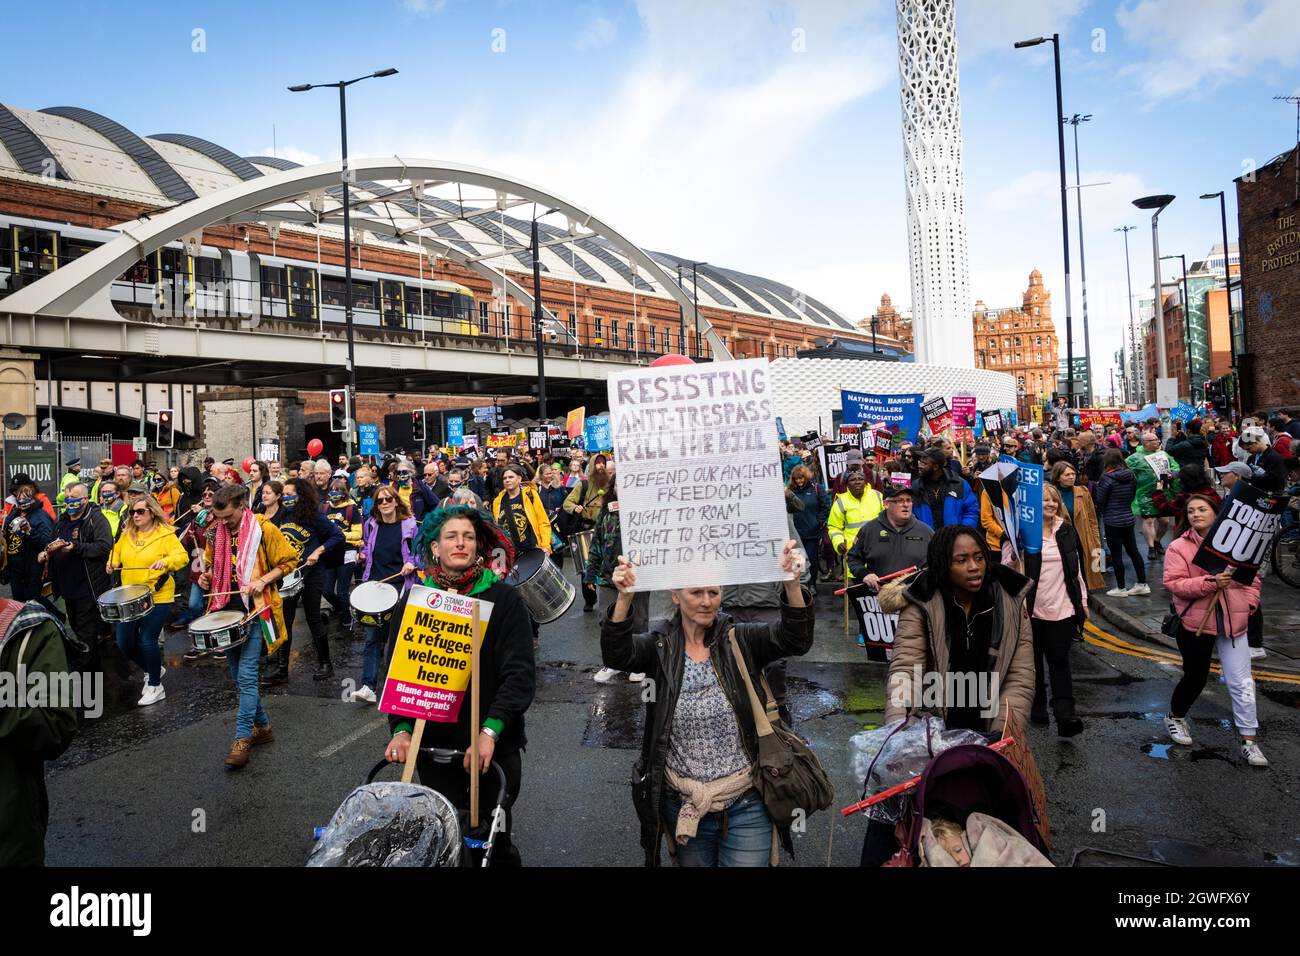 Manchester, UK. 03rd Oct, 2021. Thousands of demonstrators march past Manchester Central where the Conservative party Conference is being held. Social movements and unions unite demanding fairer policies for the working class. Credit: Andy Barton/Alamy Live News Stock Photo